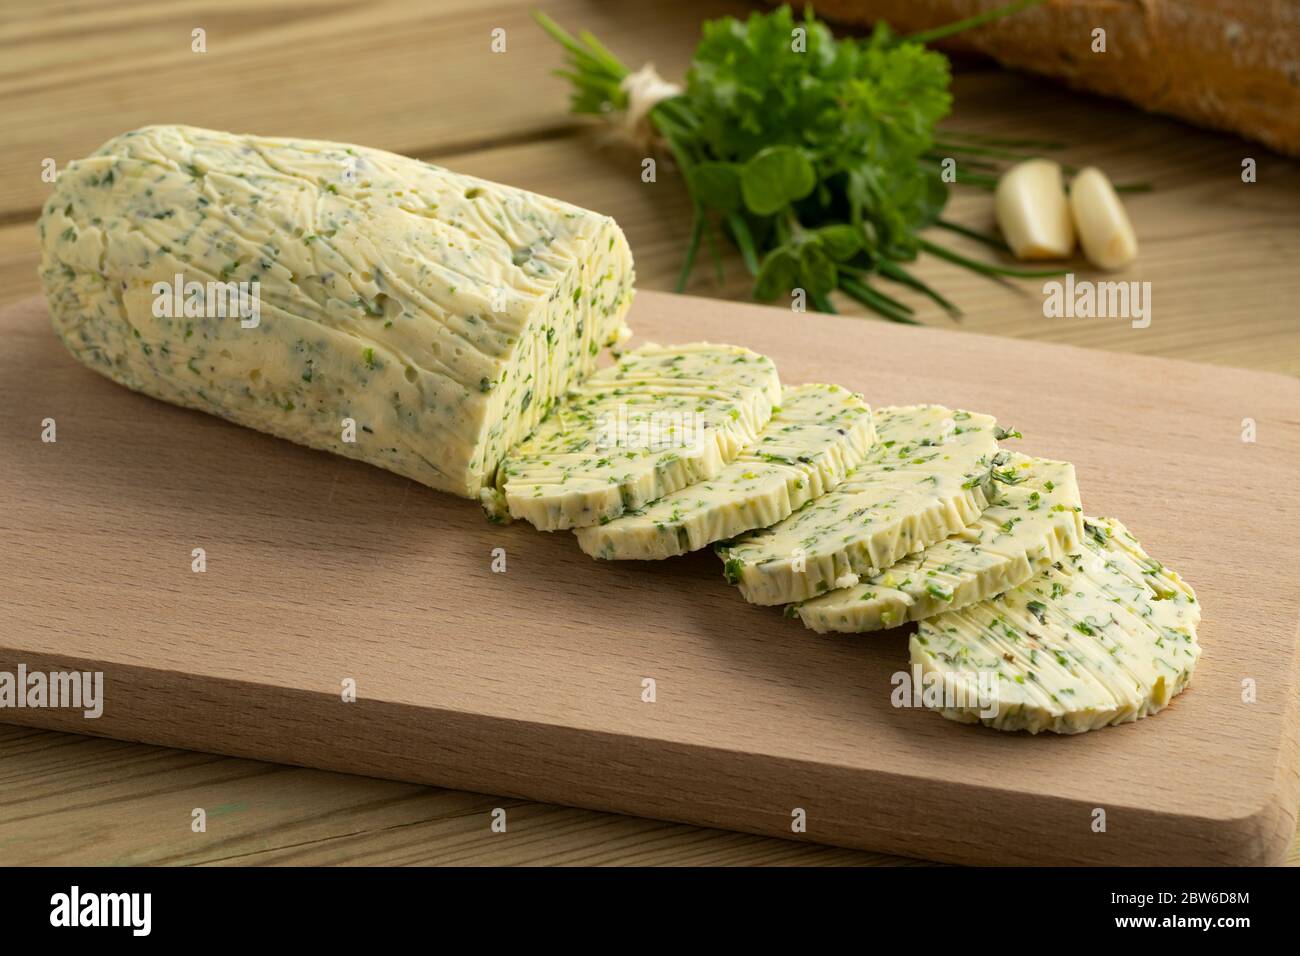 Sliced fresh made herb butter close up on a cutting board Stock Photo